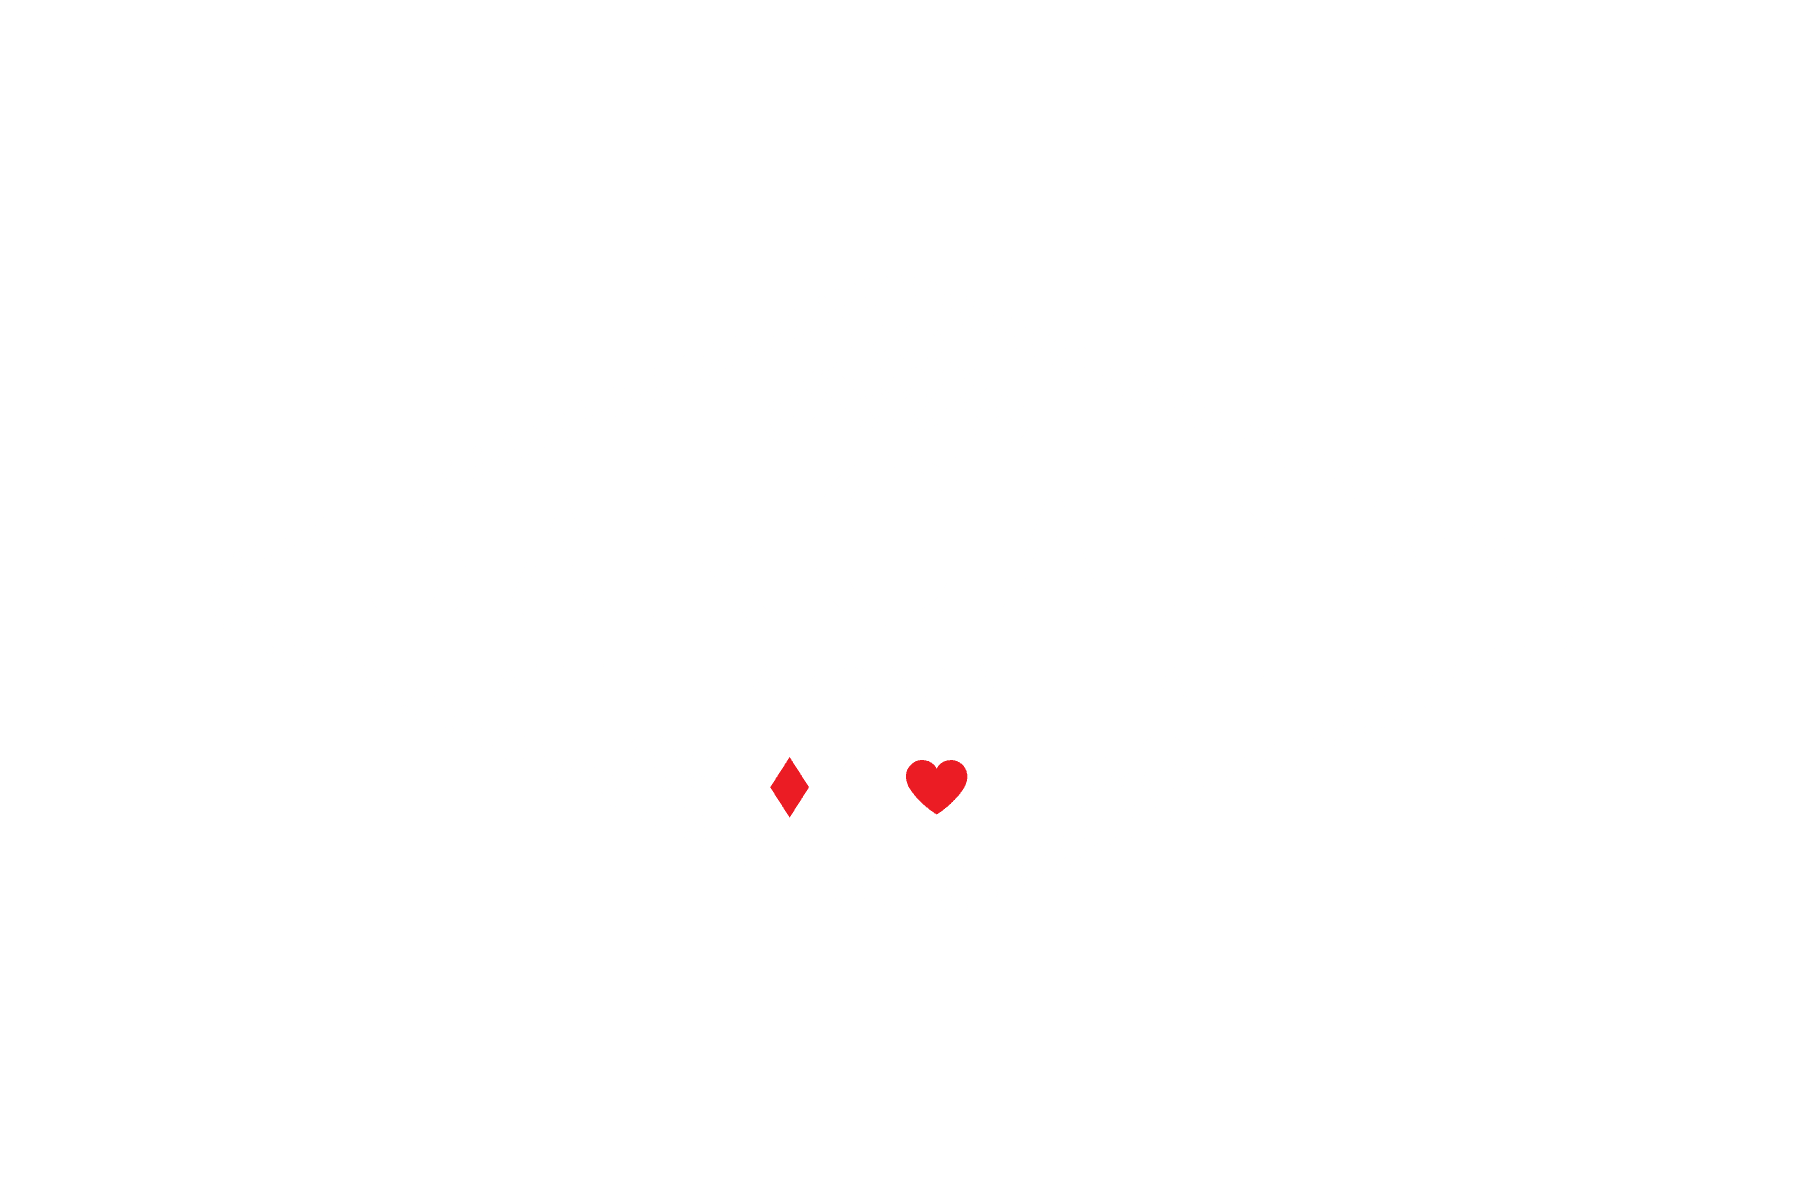 Official website of the Arcada Theatre in St. Charles